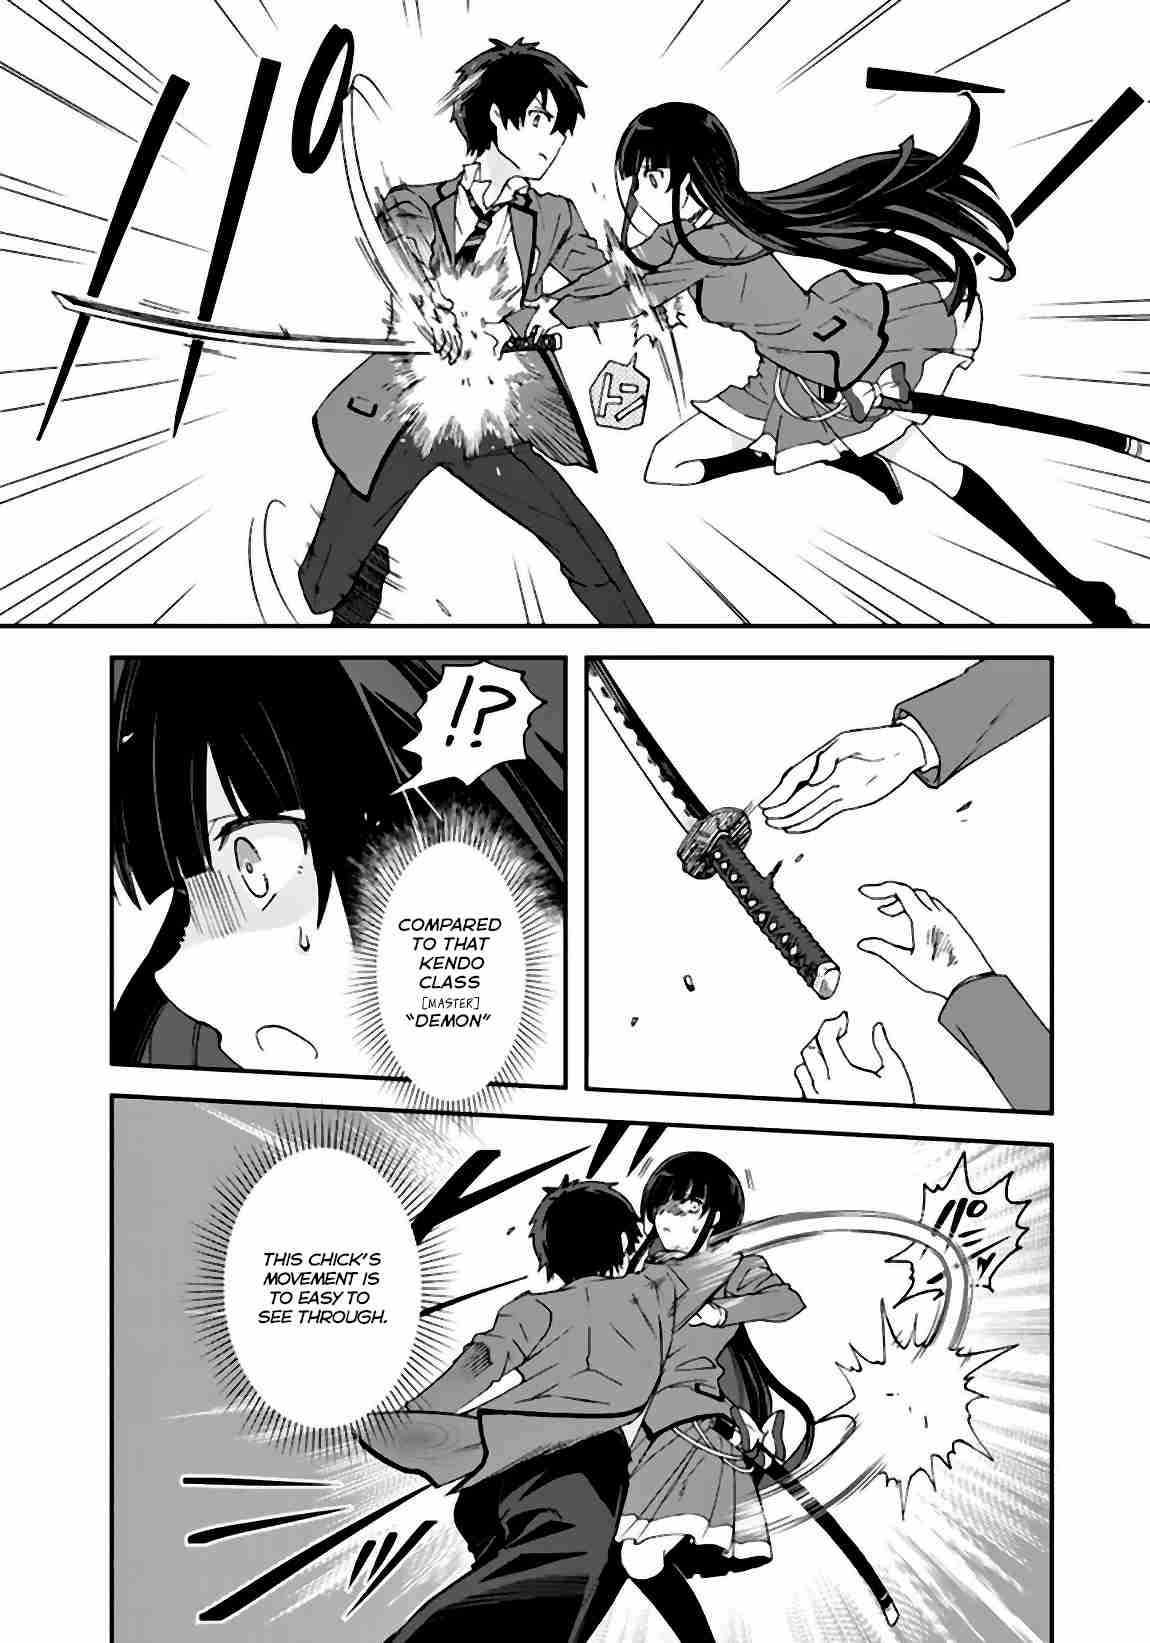 I, Who Acquired a Trash Skill 【Thermal Operator】, Became Unrivaled. Vol. 1 Ch. 4 A fully bloomed Sakura